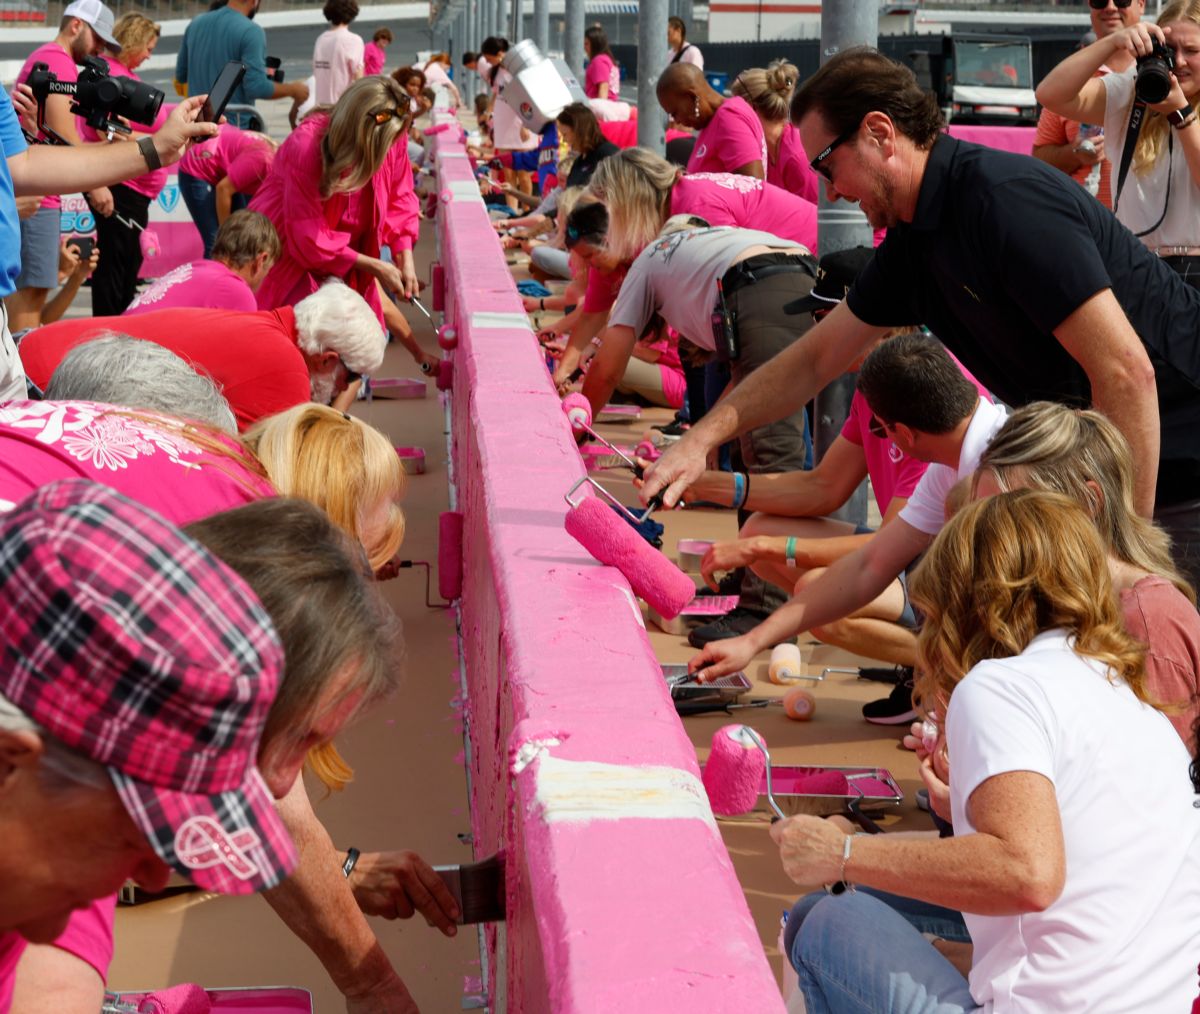 NASCAR Drivers Team with Breast Cancer Survivors Paint Pit Wall Pink, CMS  in the Community, Community